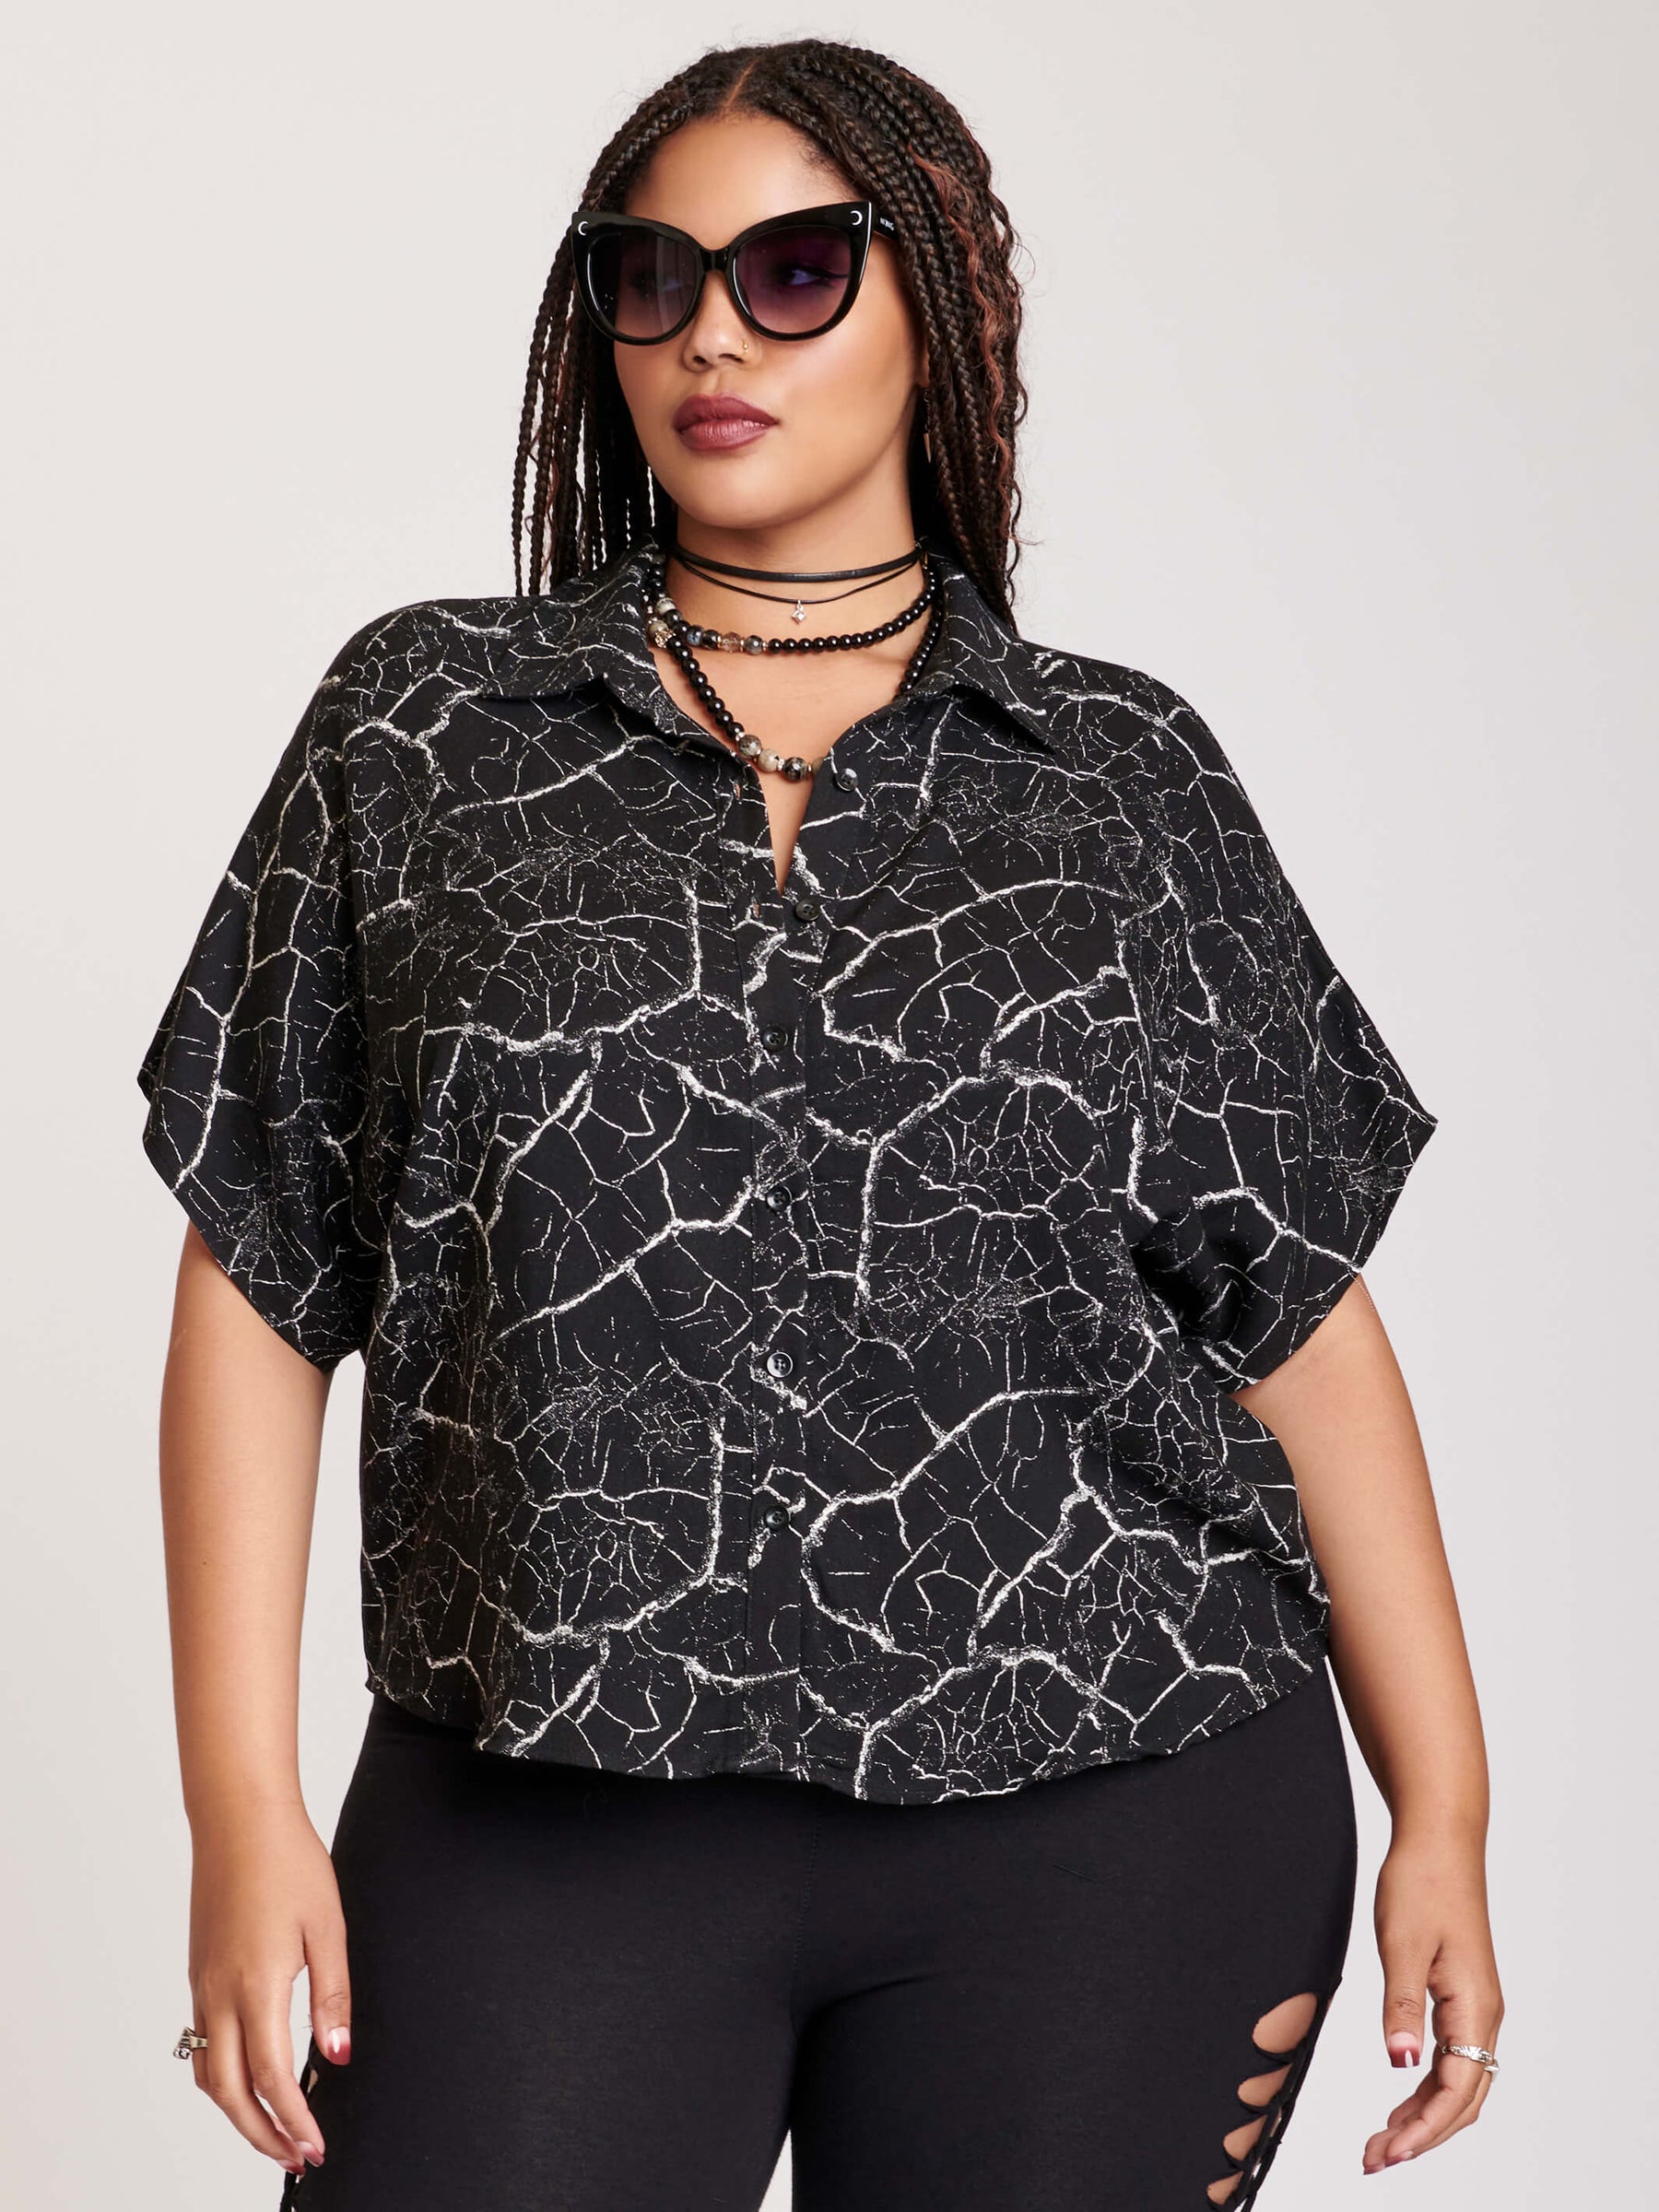 Plus Size Goth Clothes & Alternative Clothing | Midnight Hour